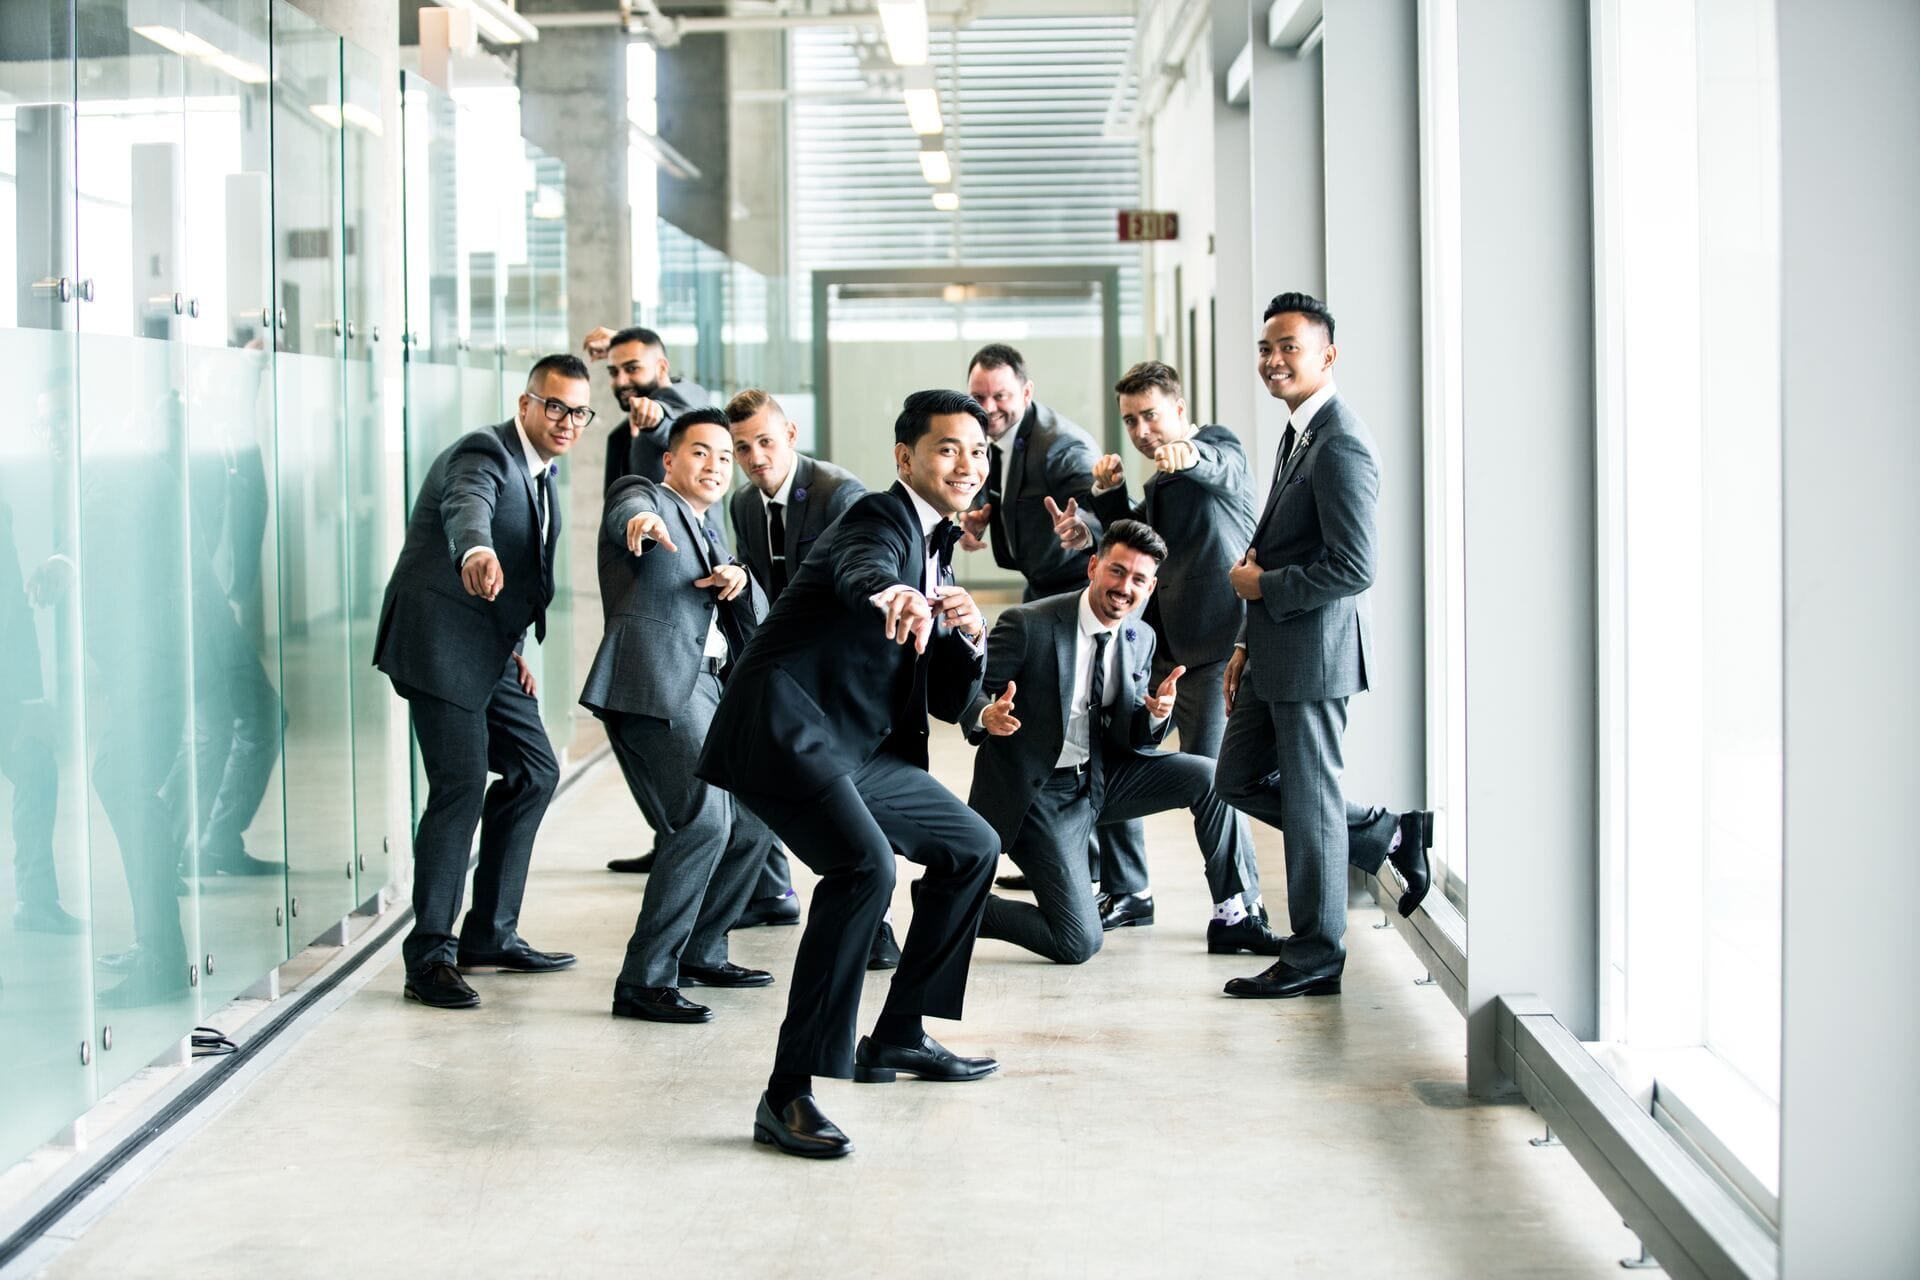 Who are the Groomsmen / Honor Attendants?